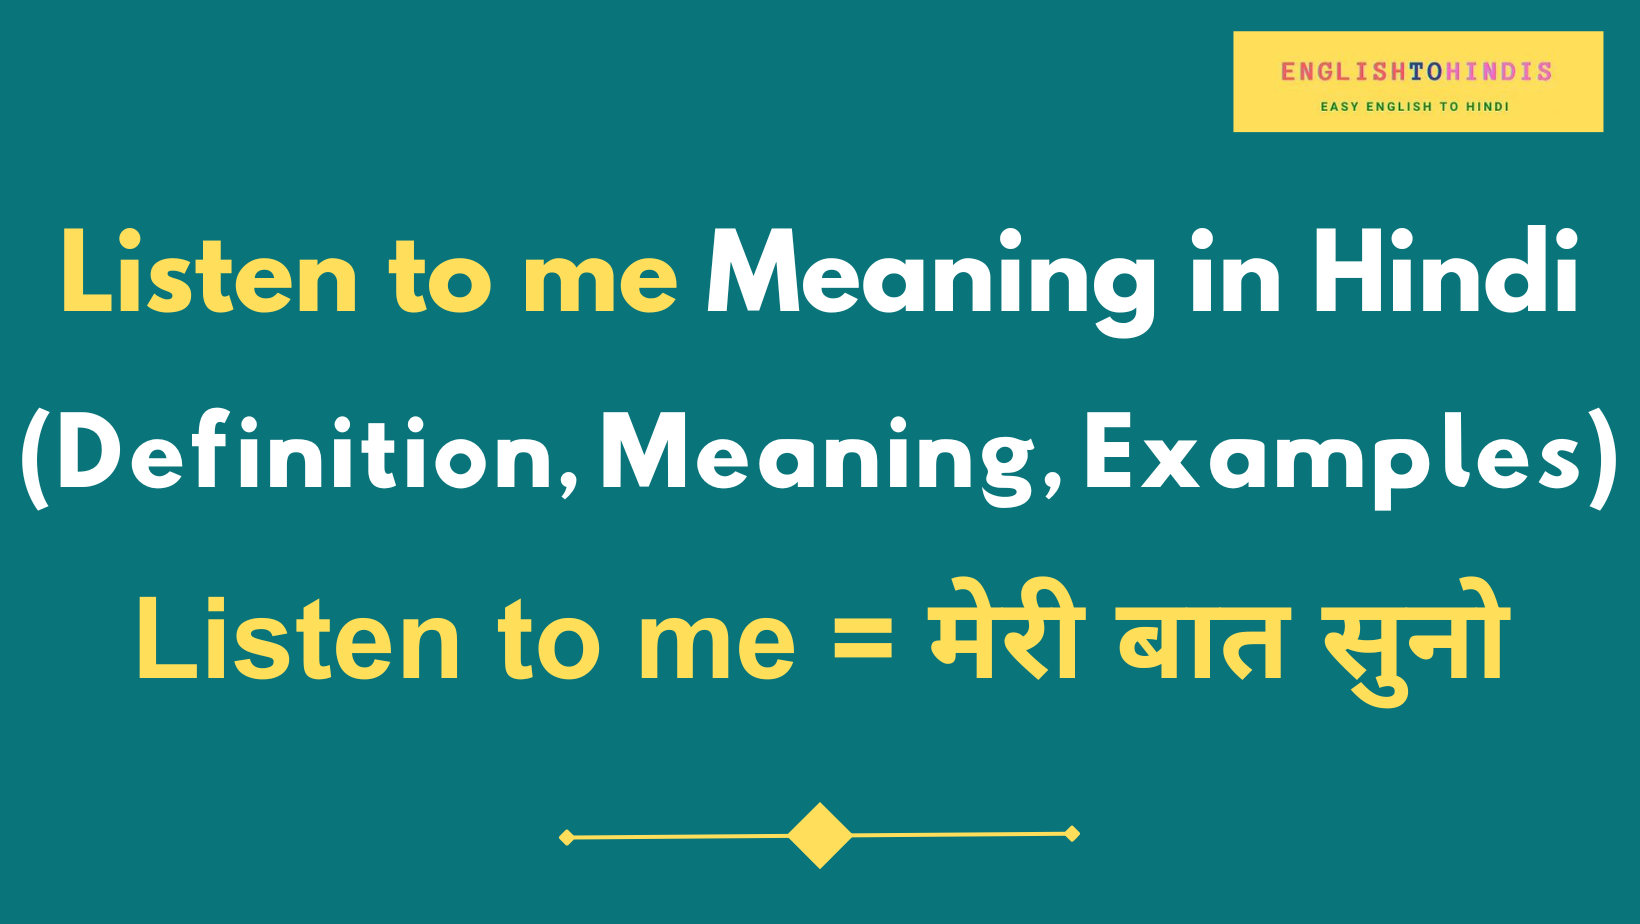 Listen to me Meaning in Hindi